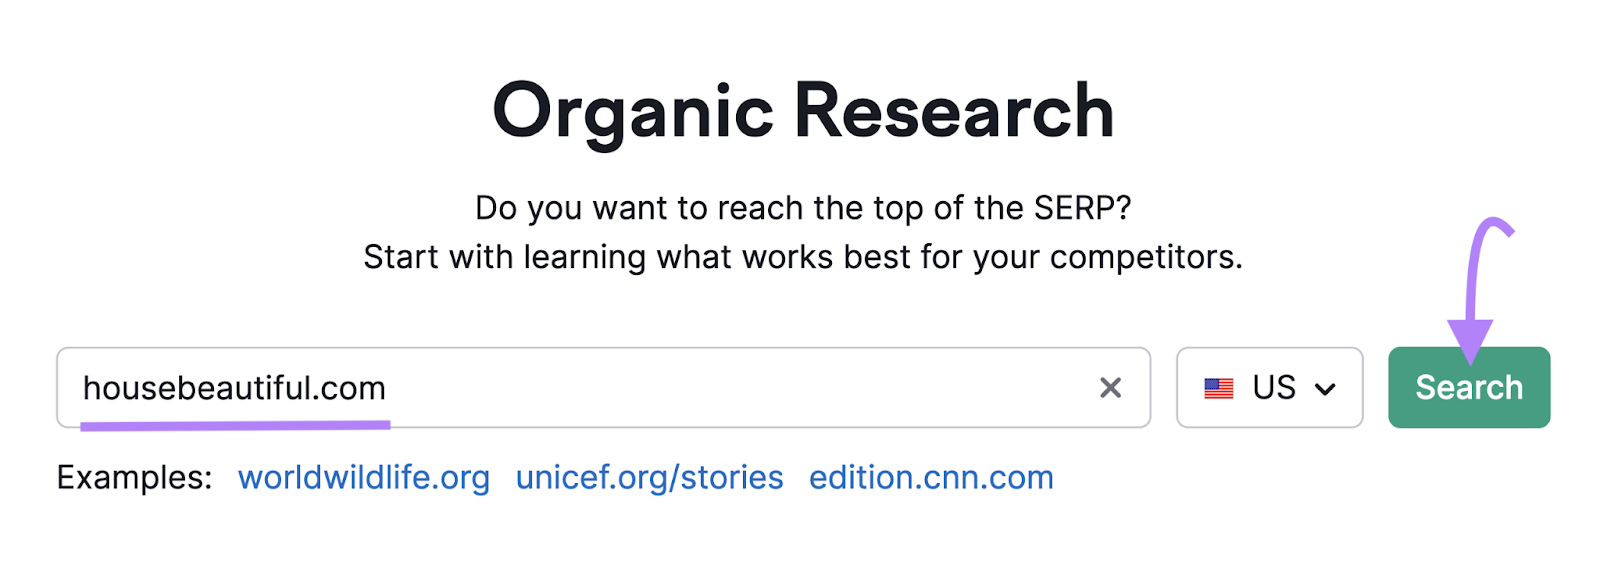 "housebeautiful.com" entered into Organic Research search bar